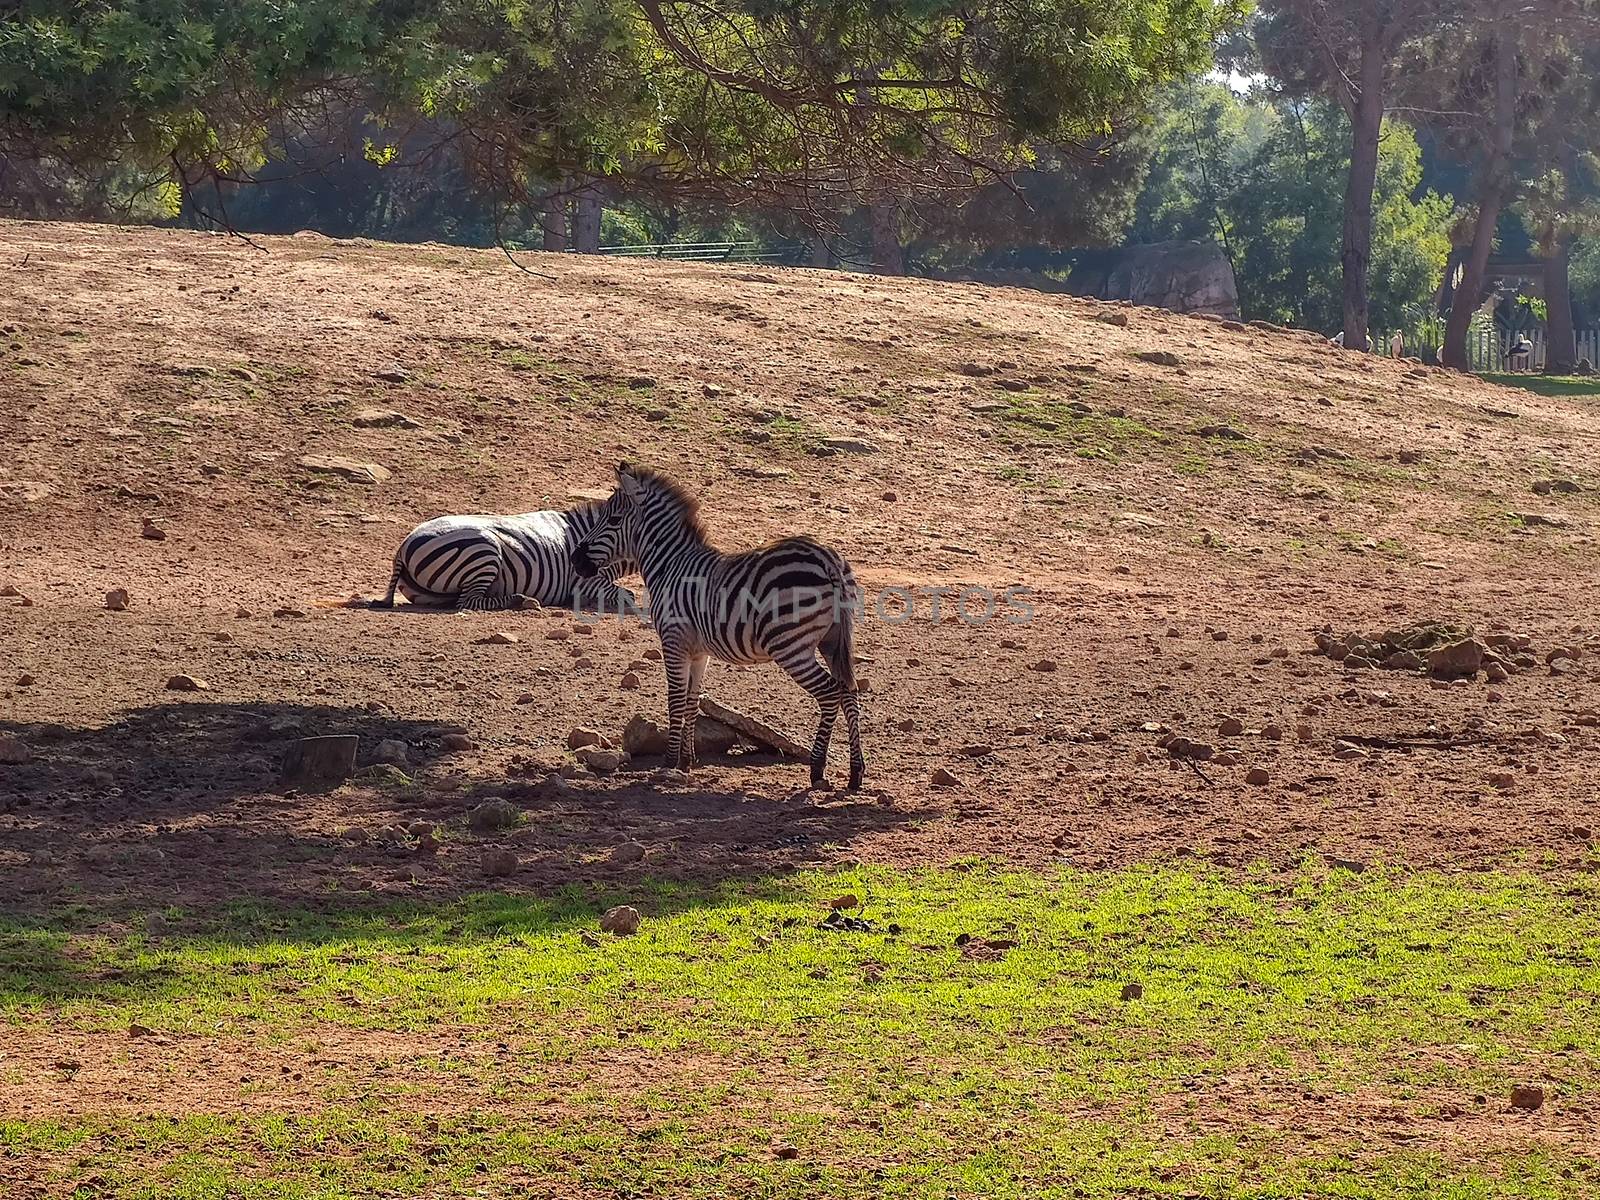 Two zebras sitting and standing by devoxer